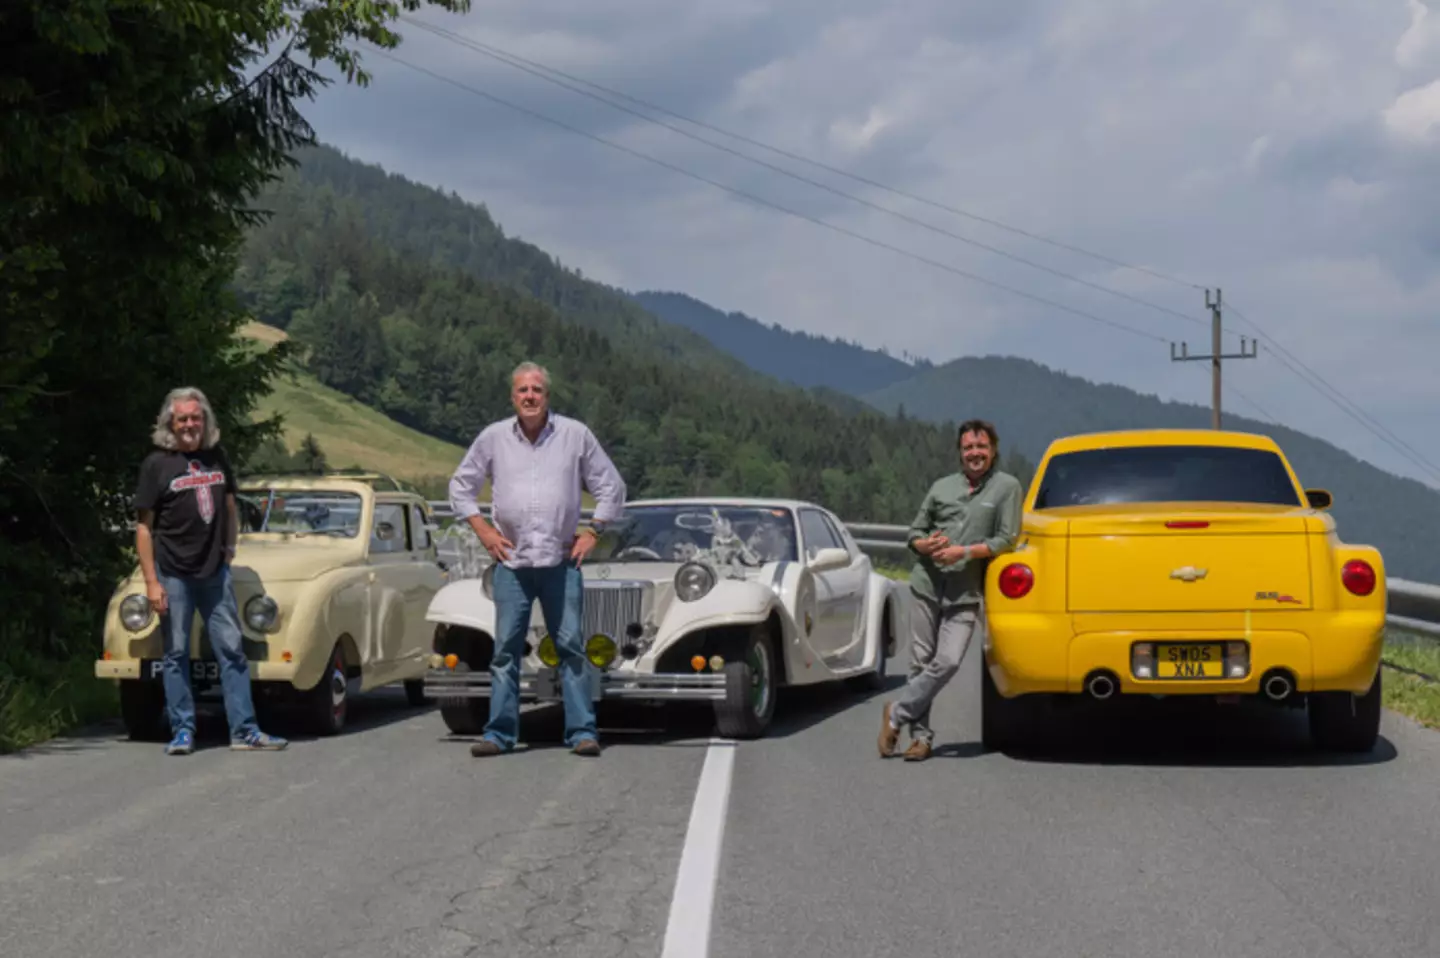 James May has presented The Grand Tour since 2016.